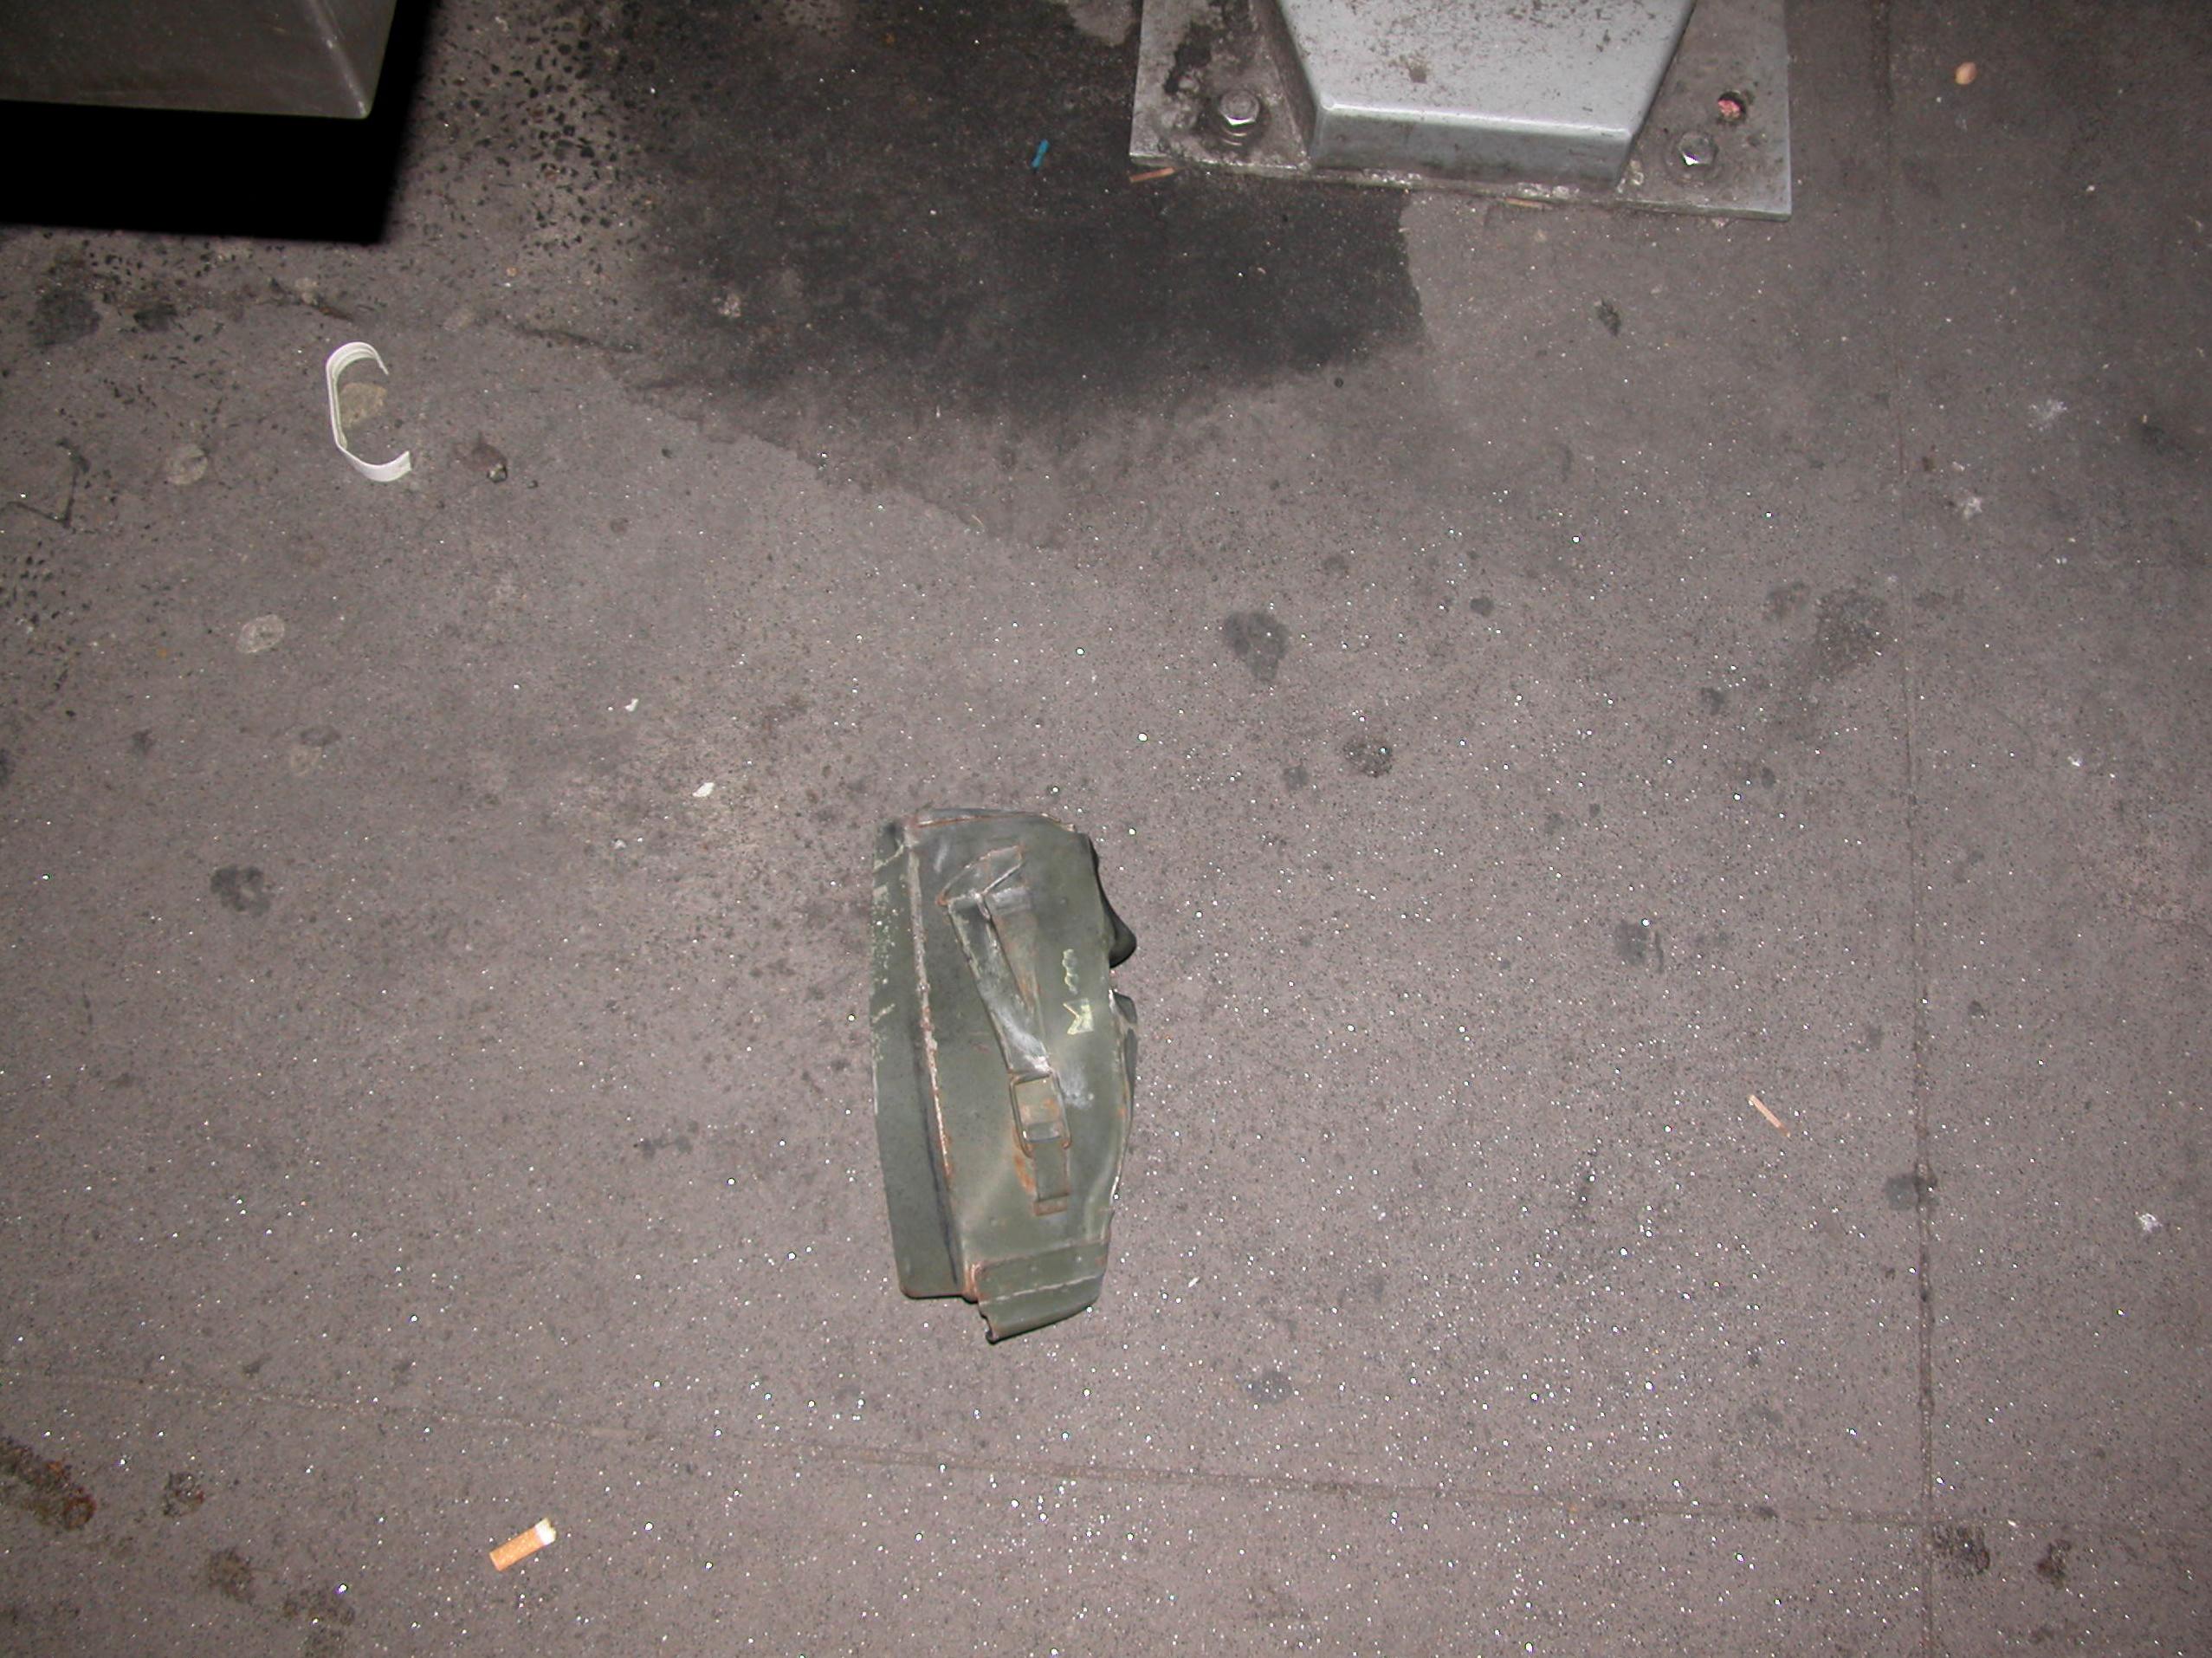 Ammunition can found at the scene of the unsolved March 6, 2008 bombing of the United States Armed Forces Recruiting Station in Times Square. See https://www.fbi.gov/contact-us/field-offices/newyork/news/press-releases/more-than-100-000-being-offered-for-information-in-unsolved-2008-times-square-bombing for more details.